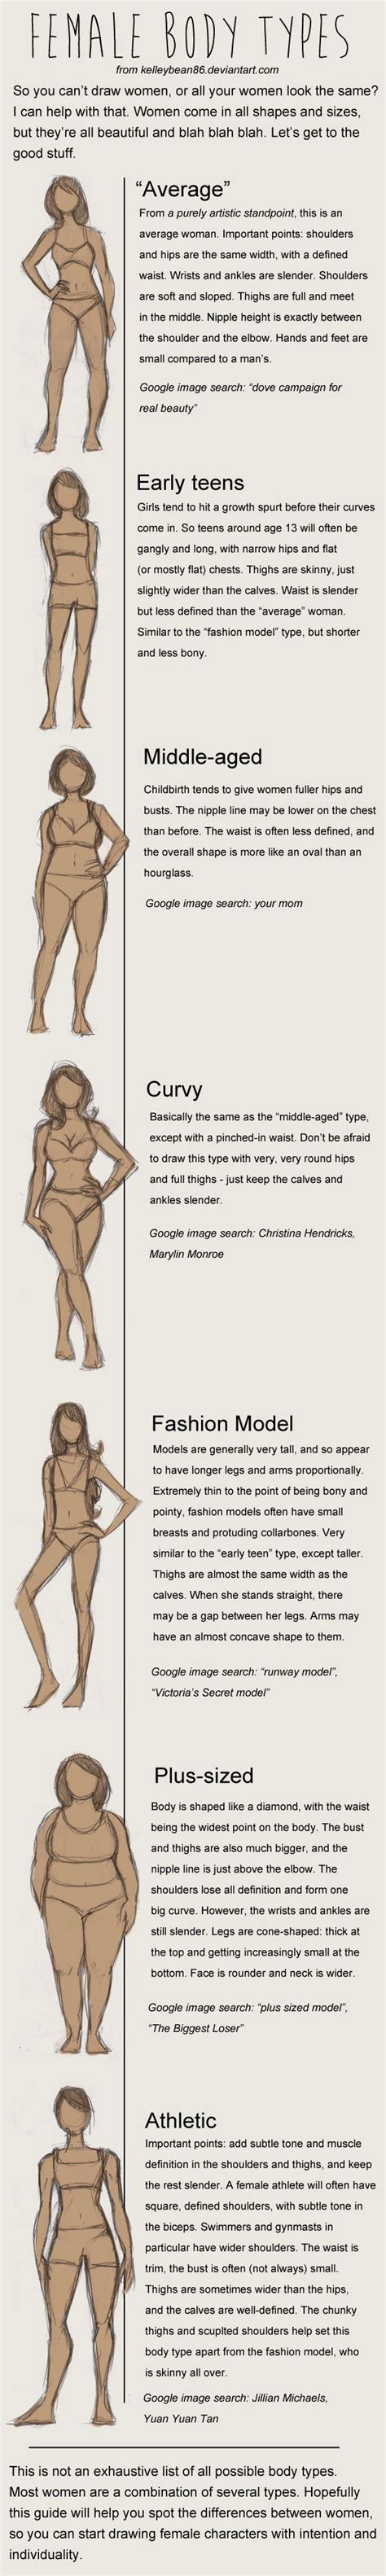 Female body types anatomy main woman figure shape free font used. Best 20+ Drawing people ideas on Pinterest | How to draw ...